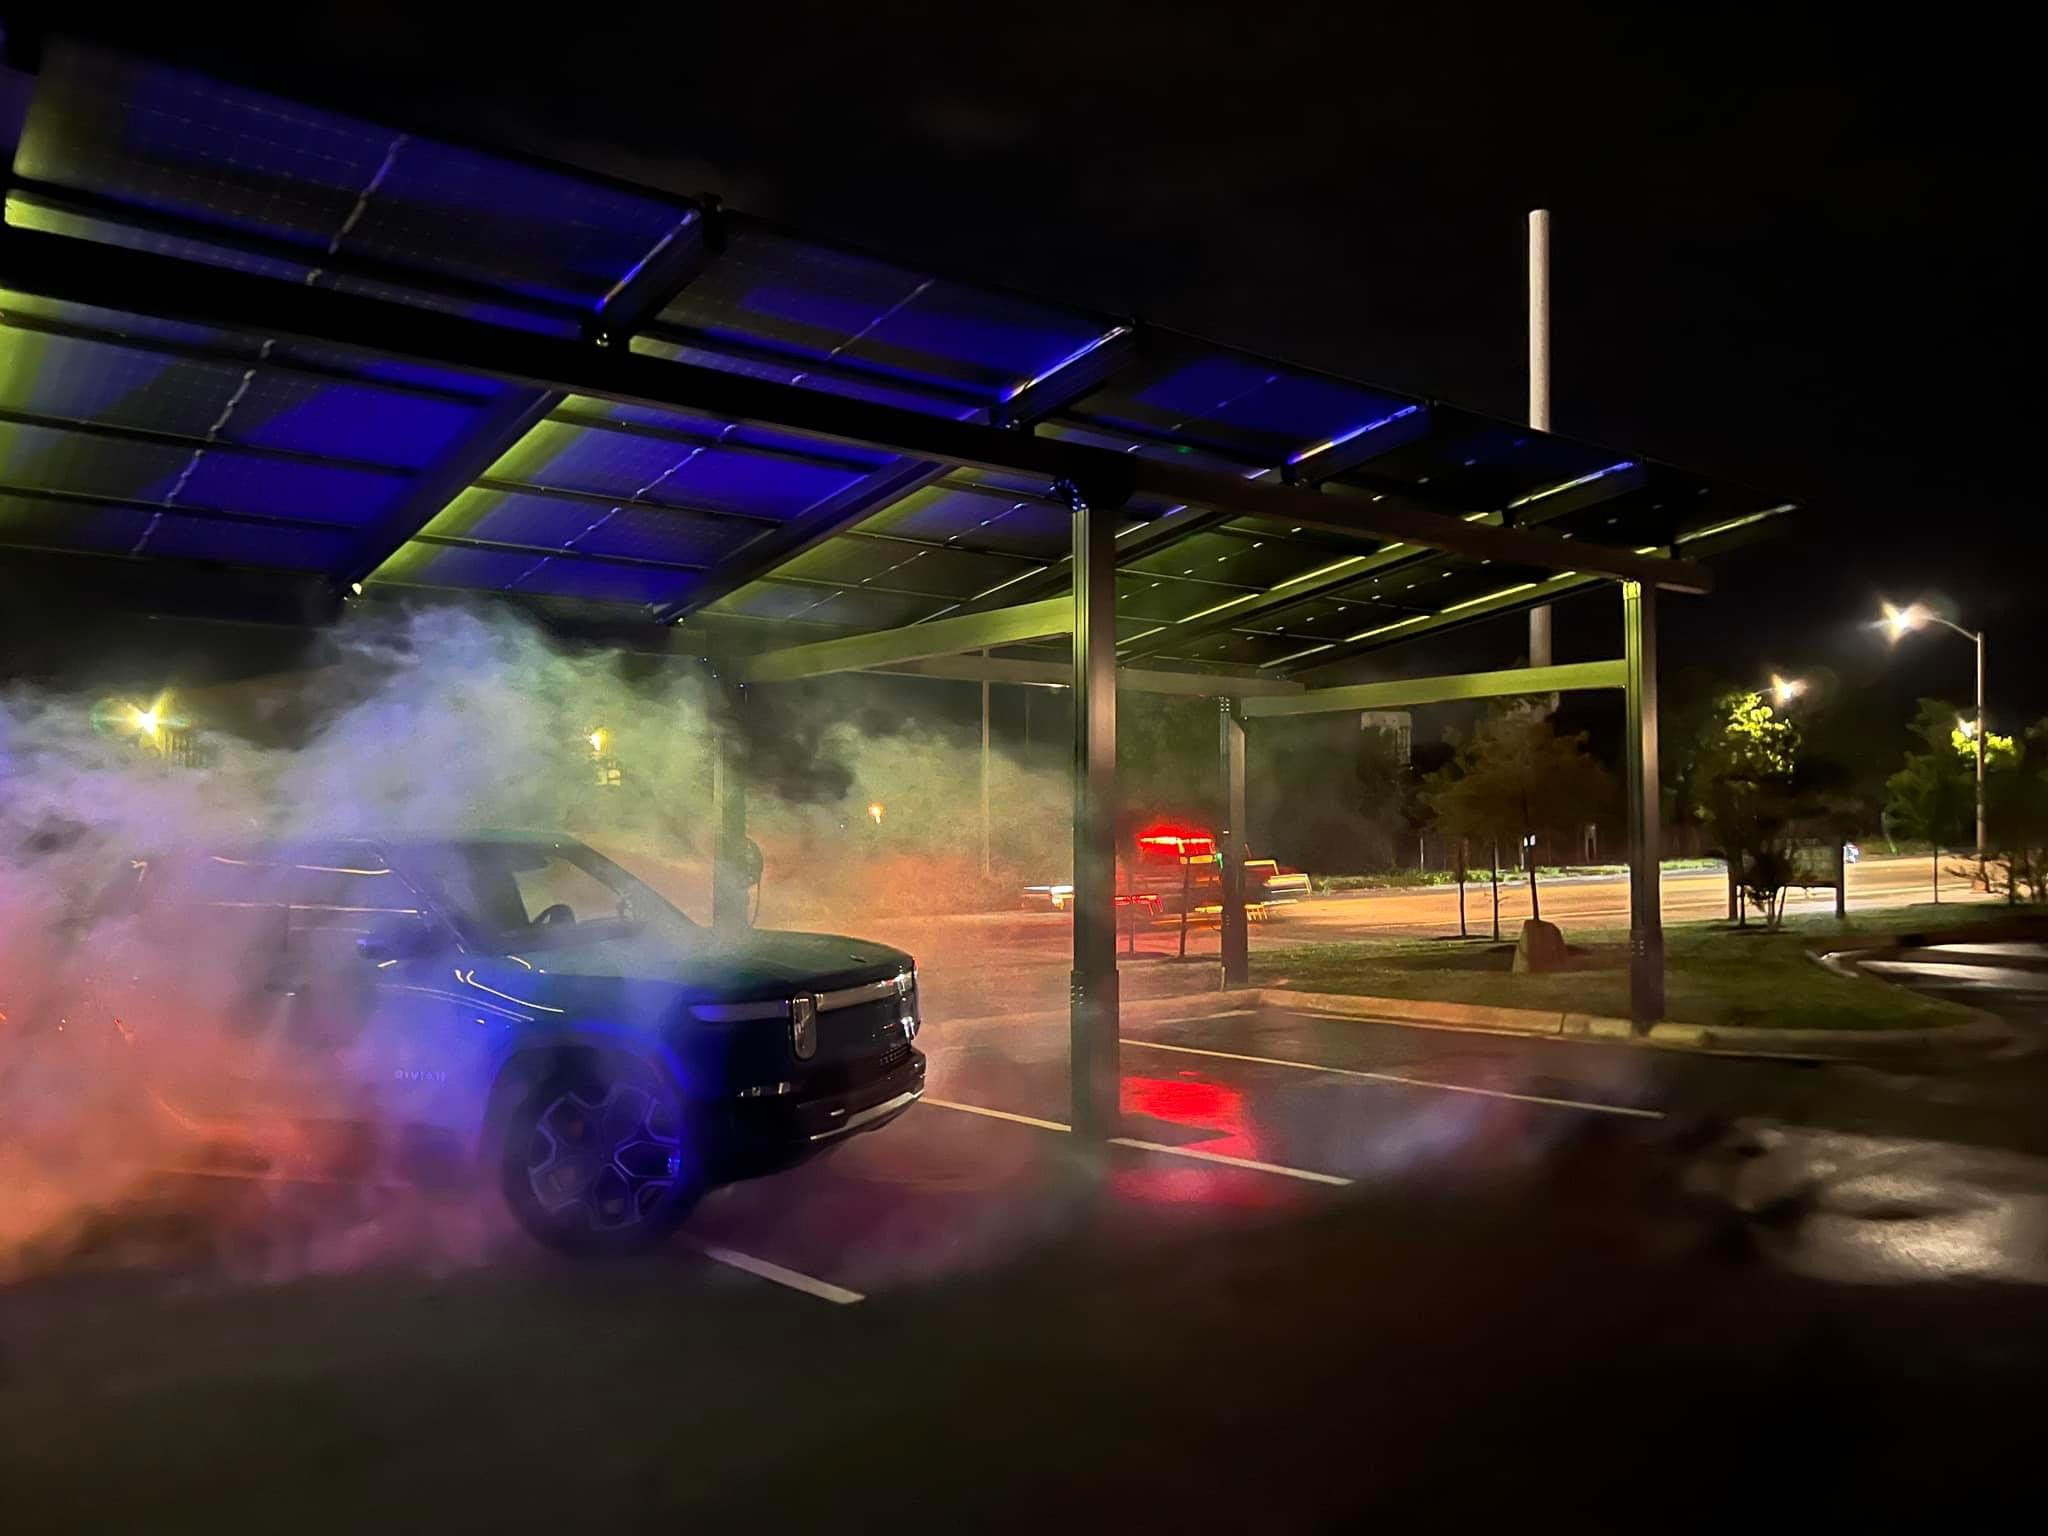 a car parked under a covered car shelter at night